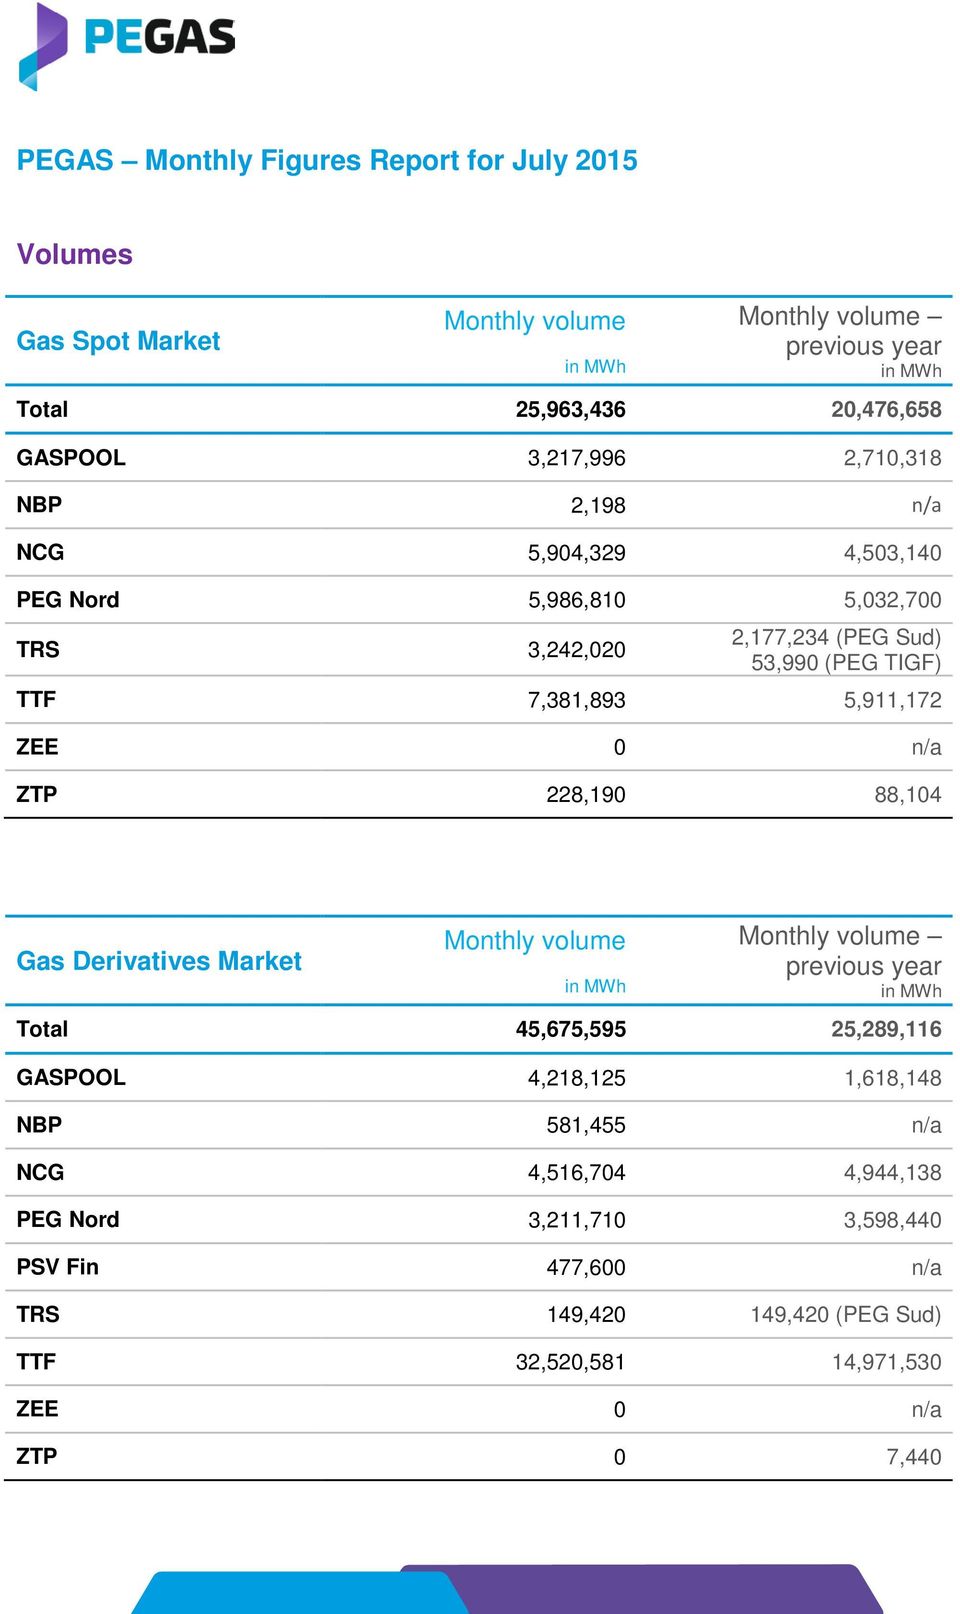 0 n/a ZTP 228,190 88,104 Gas Derivatives Market Monthly volume Monthly volume previous year Total 45,675,595 25,289,116 GASPOOL 4,218,125 1,618,148 NBP